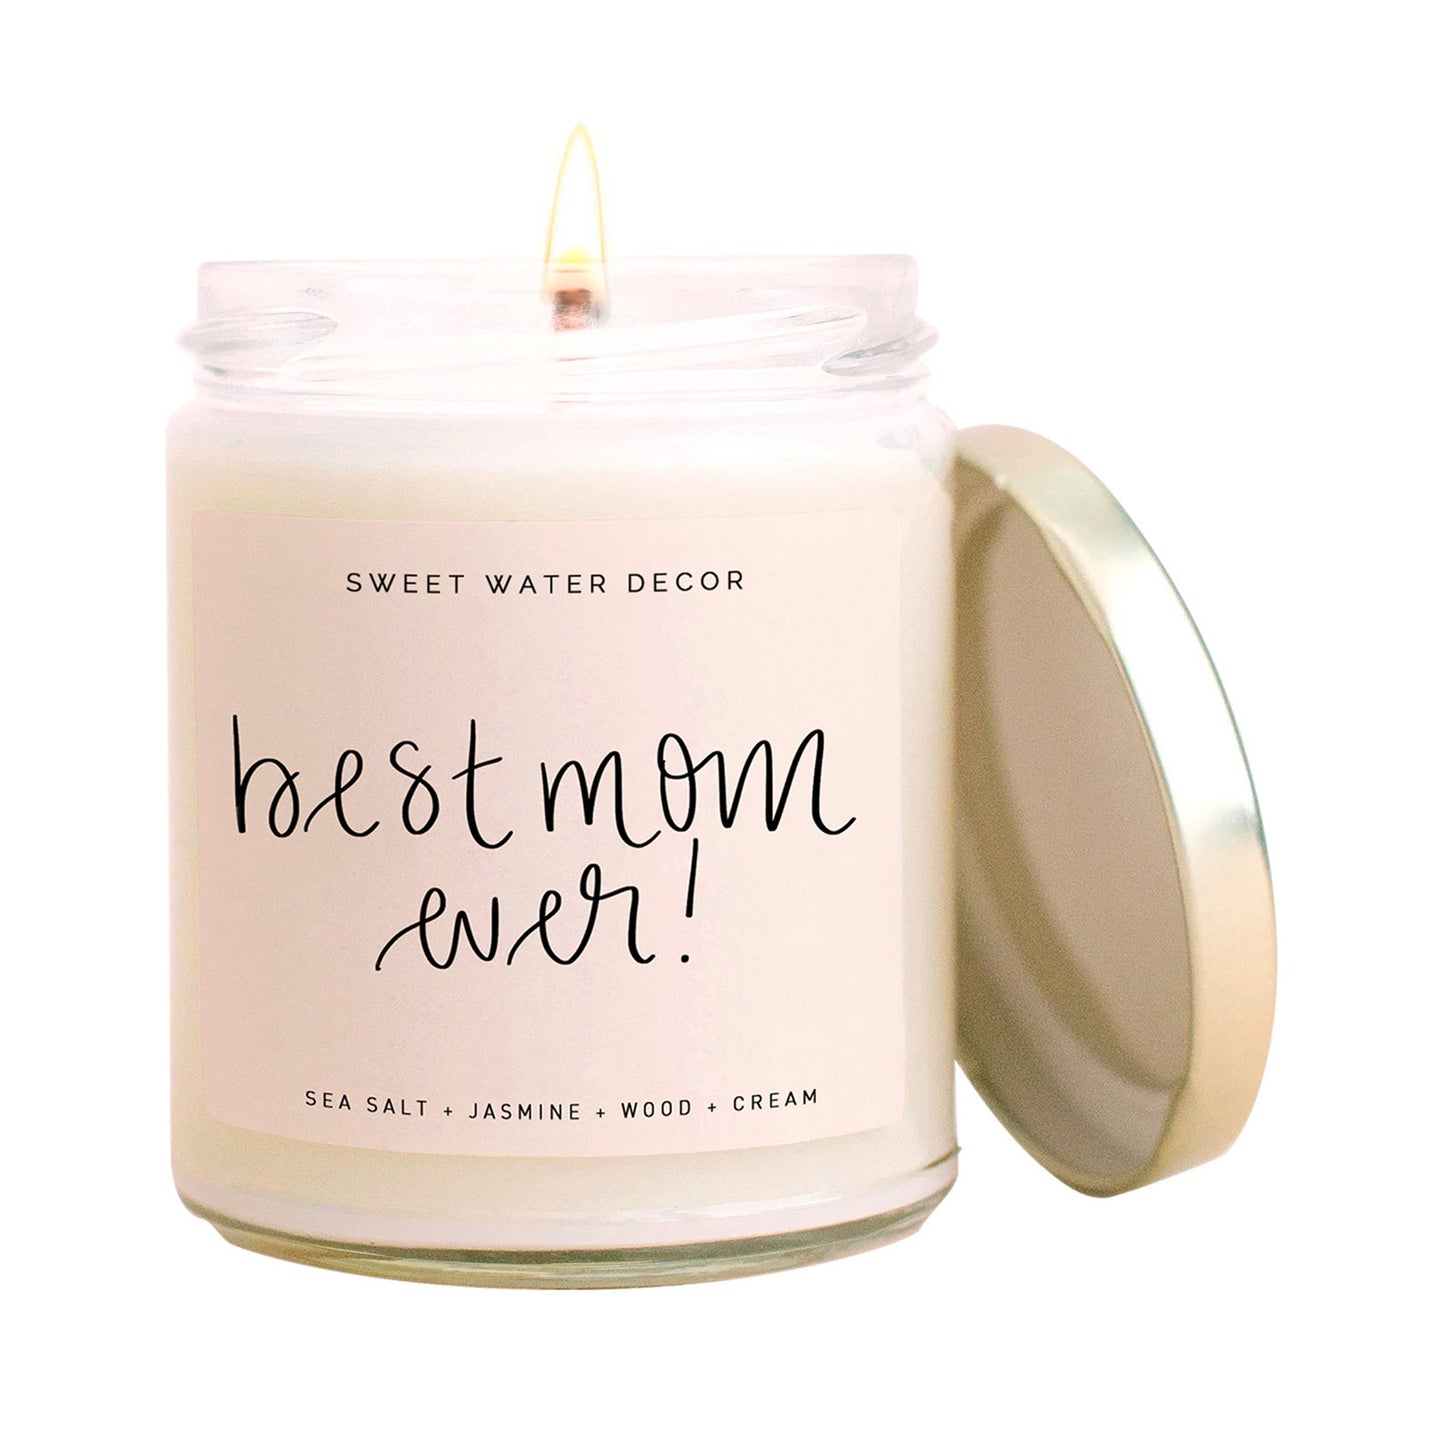 Sweet Water Decor - Best Mom Ever! Soy Candle